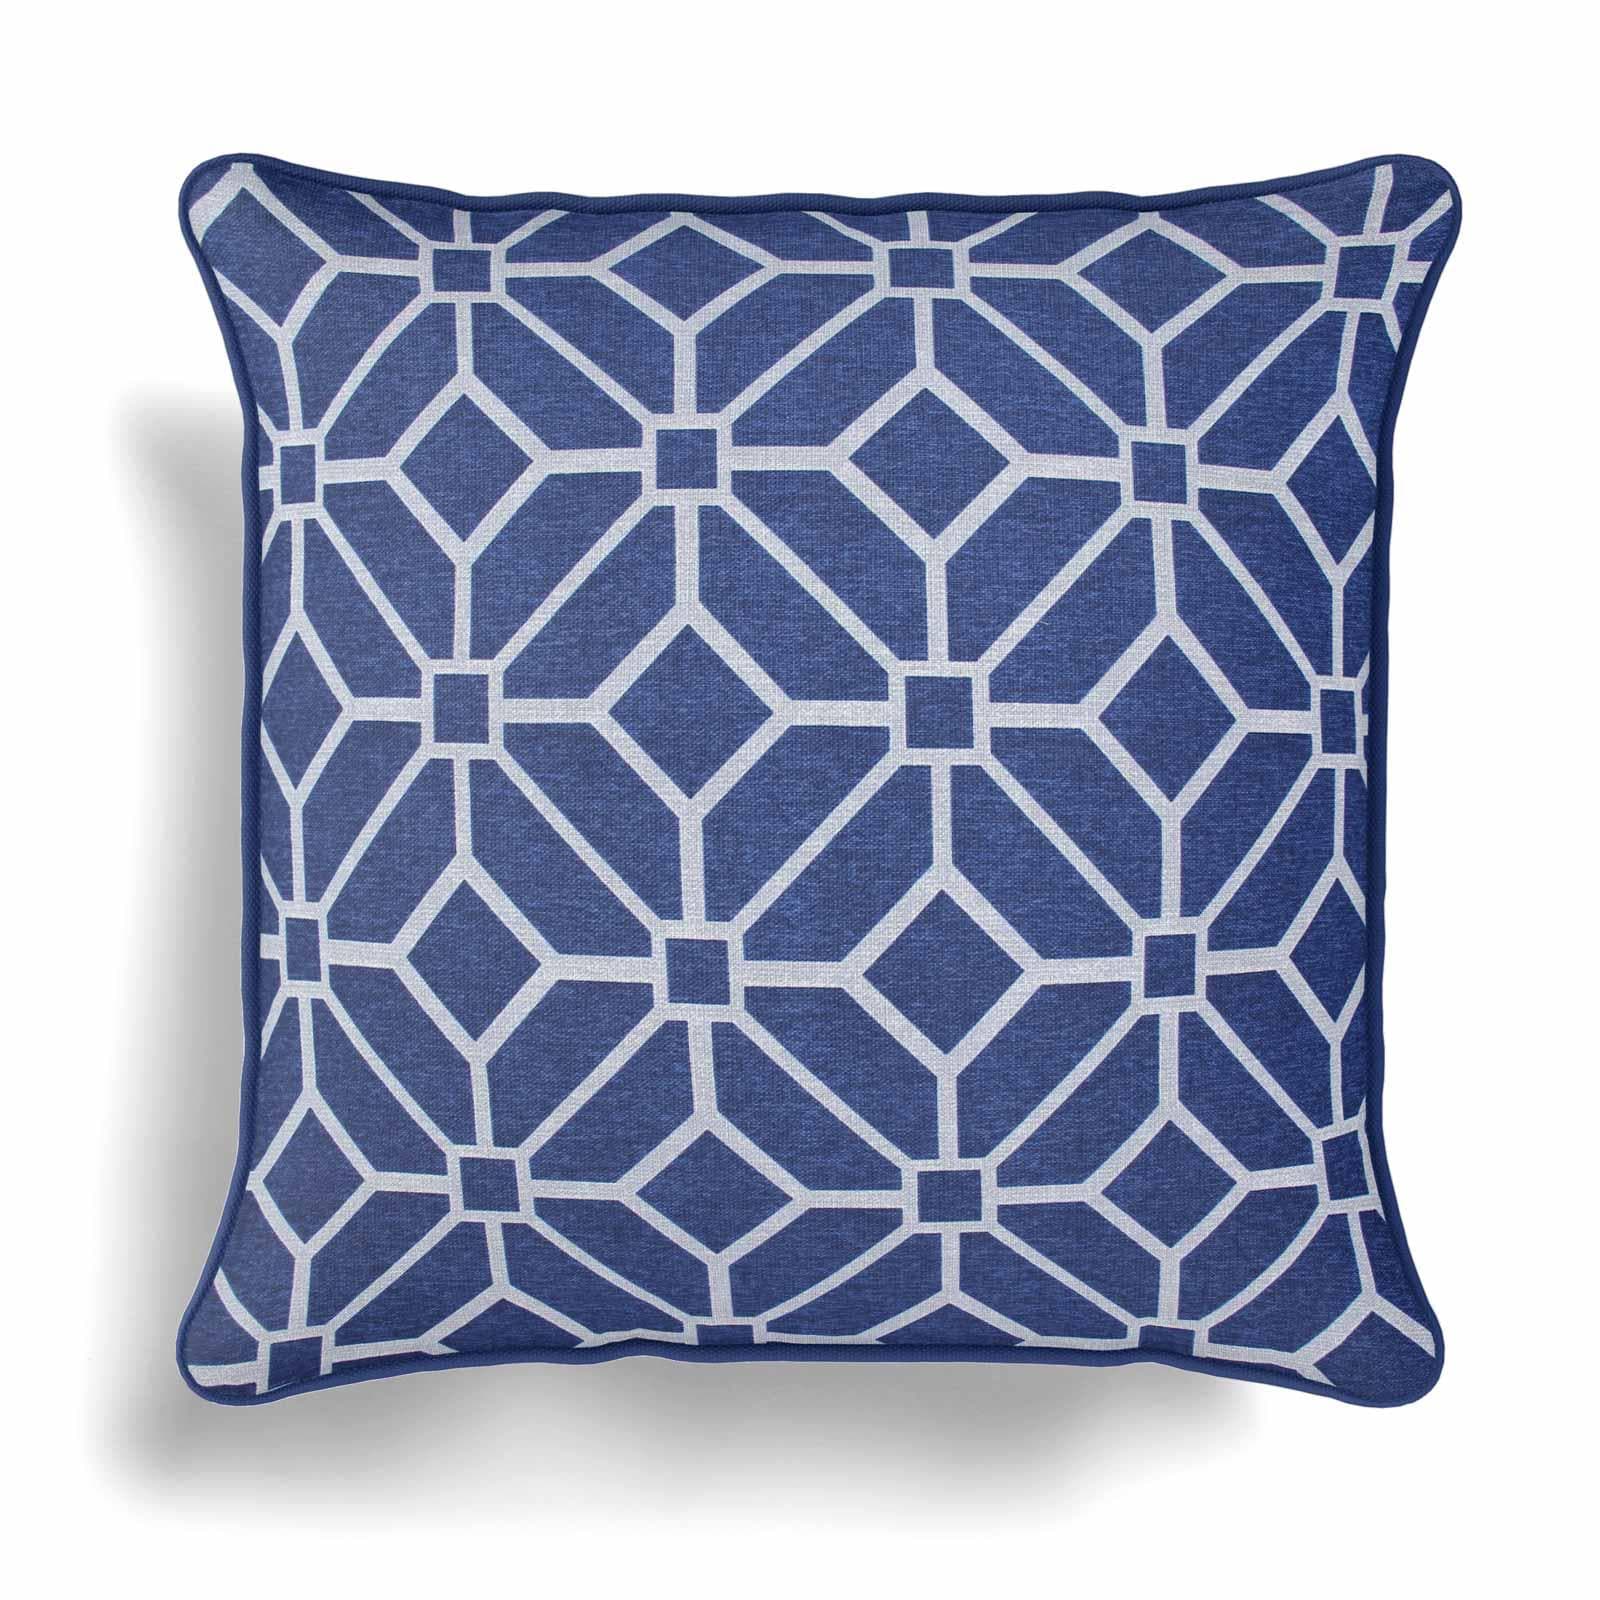 Kelso Geometric Navy Cushion Covers 18